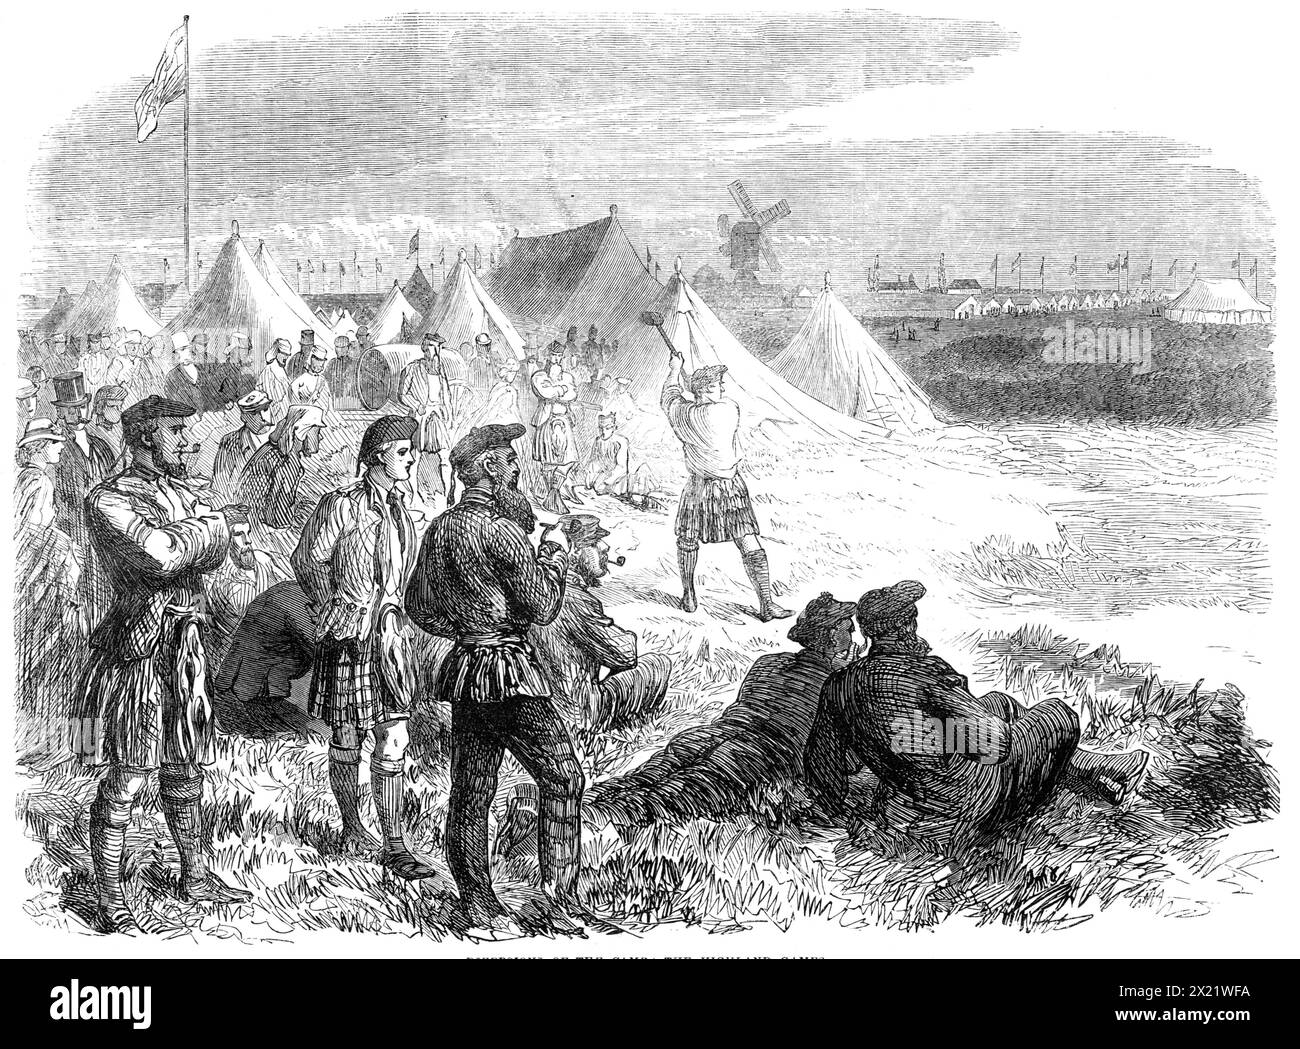 The National Rifle Association prize meeting at Wimbledon: diversions of the camp - the Highland Games, 1865. View of '...the Highland games of the London Scottish corps...which afforded so much diversion to many of the volunteers and of the ladies and gentlemen who visited their camp'. From &quot;Illustrated London News&quot;, 1865. Stock Photo